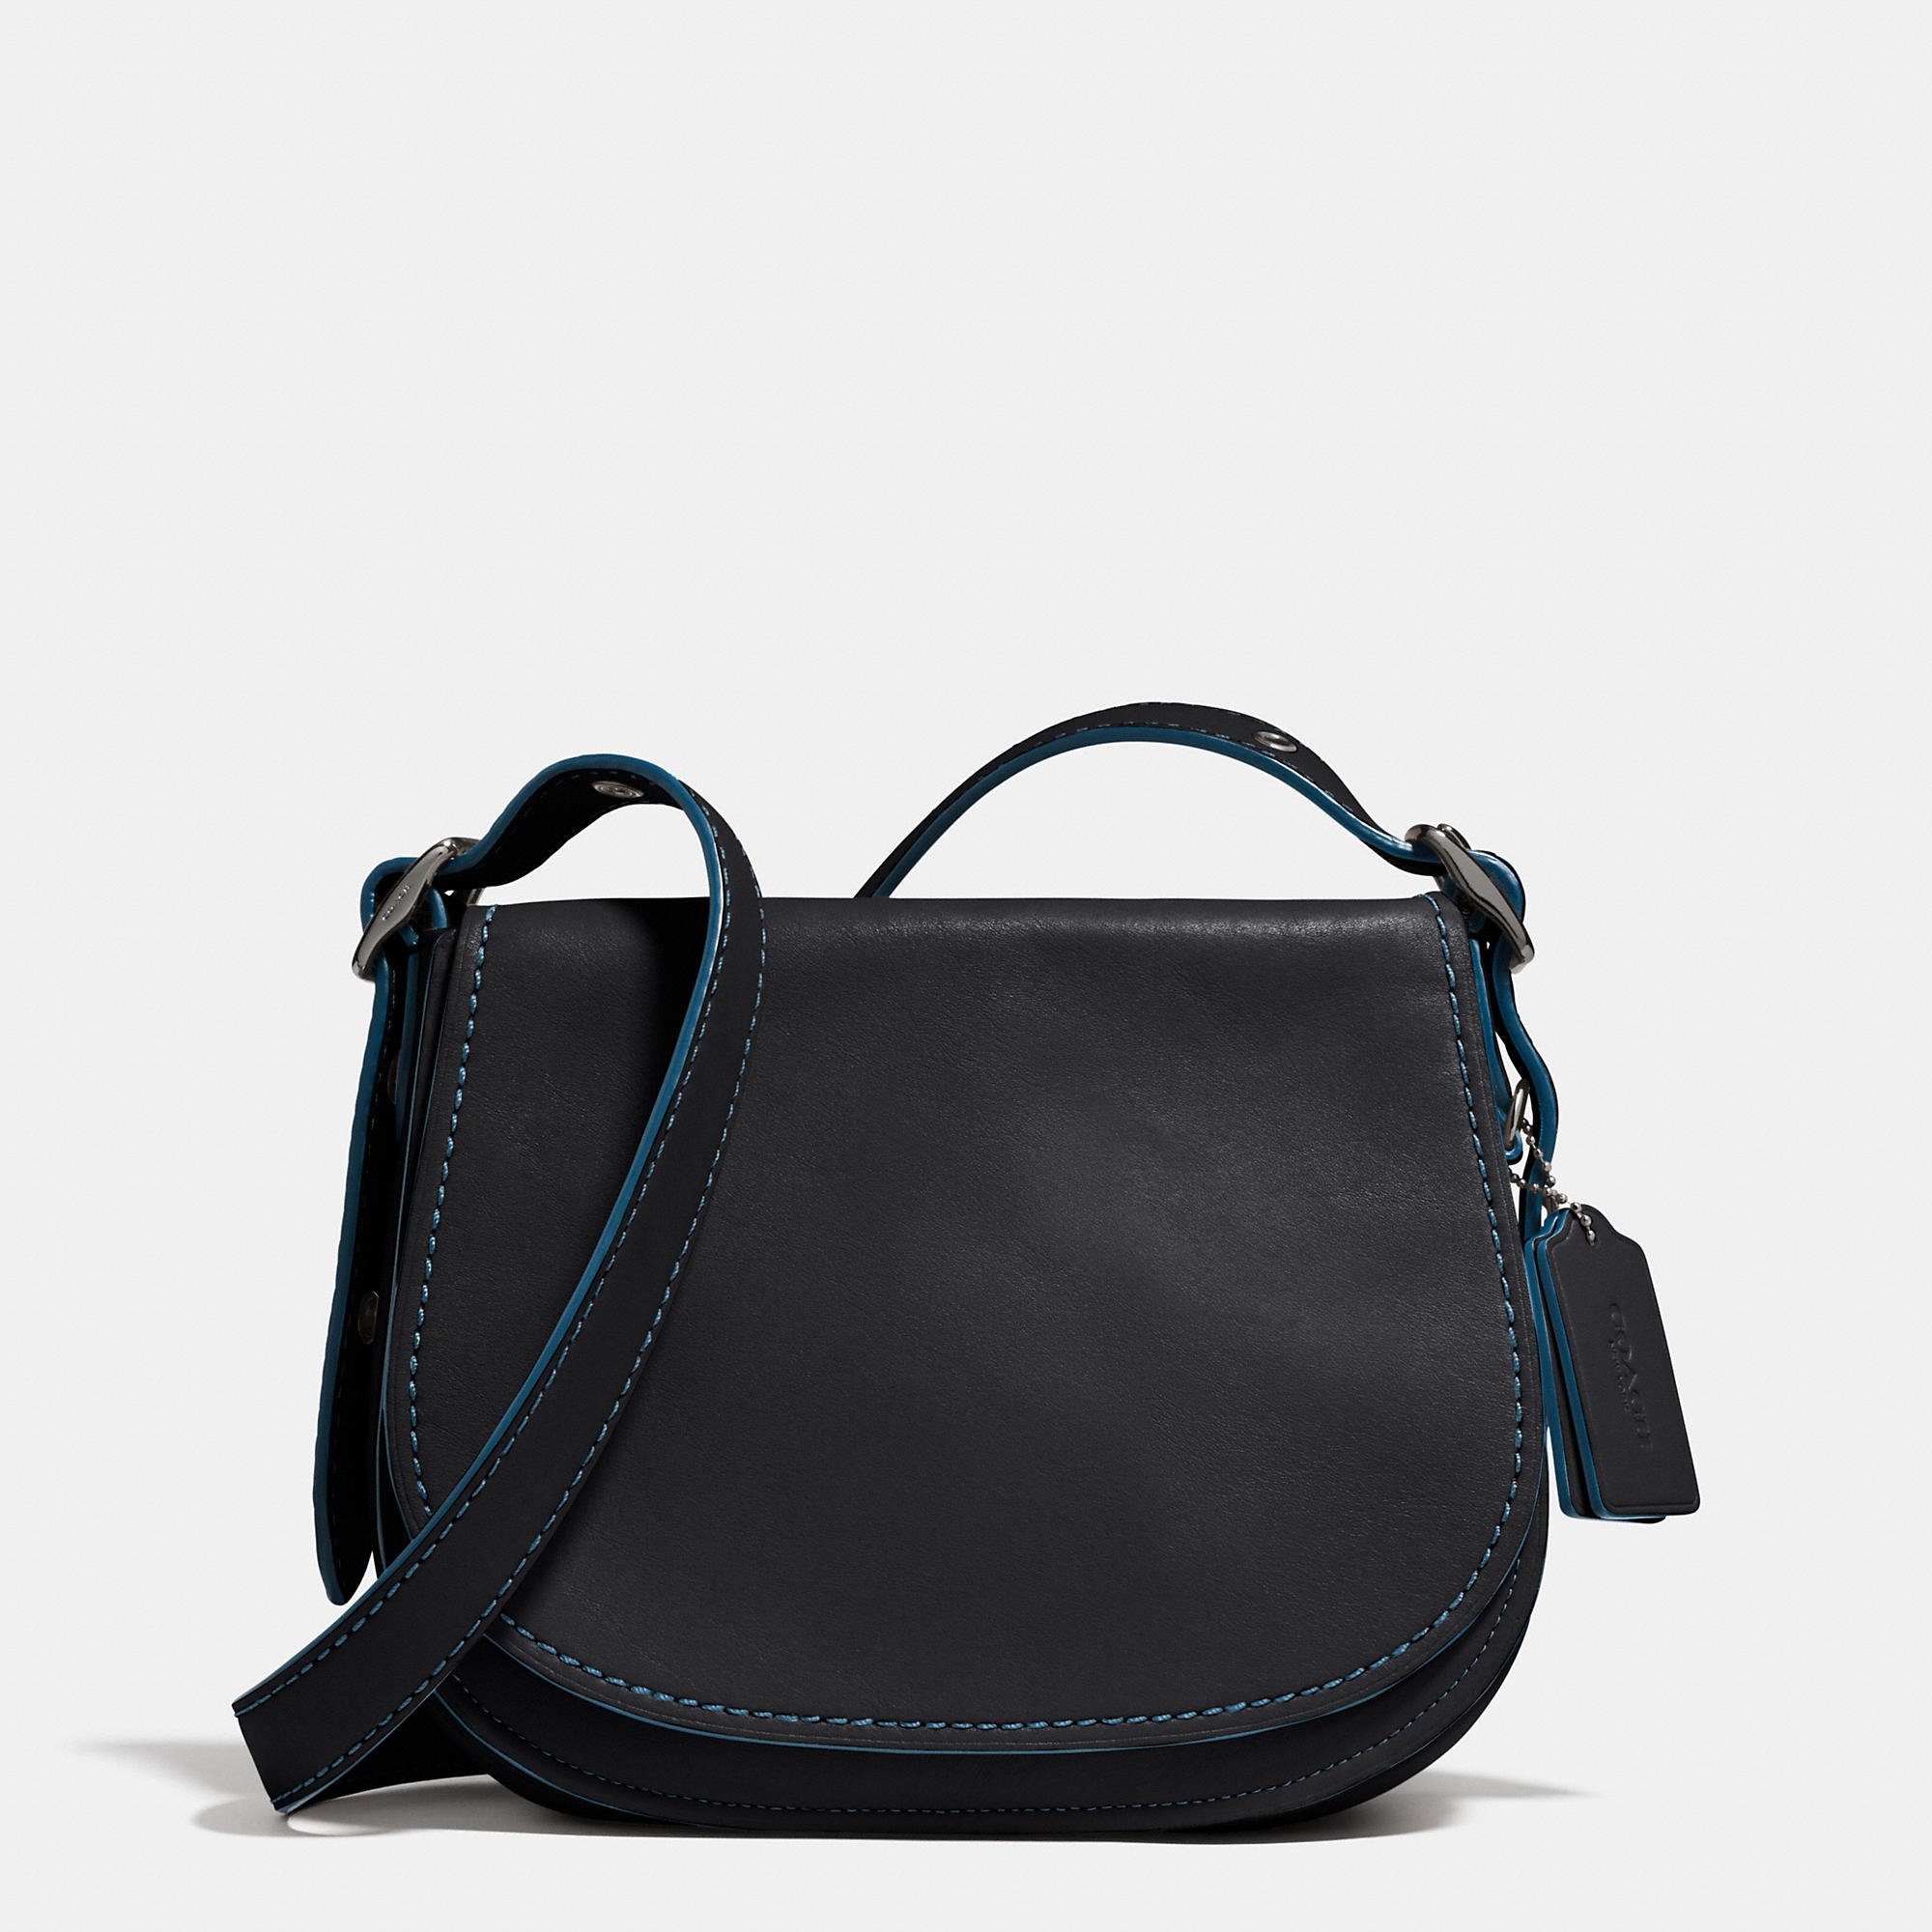 Coach Saddle Bag 23 In Glovetanned Leather in Black | Lyst